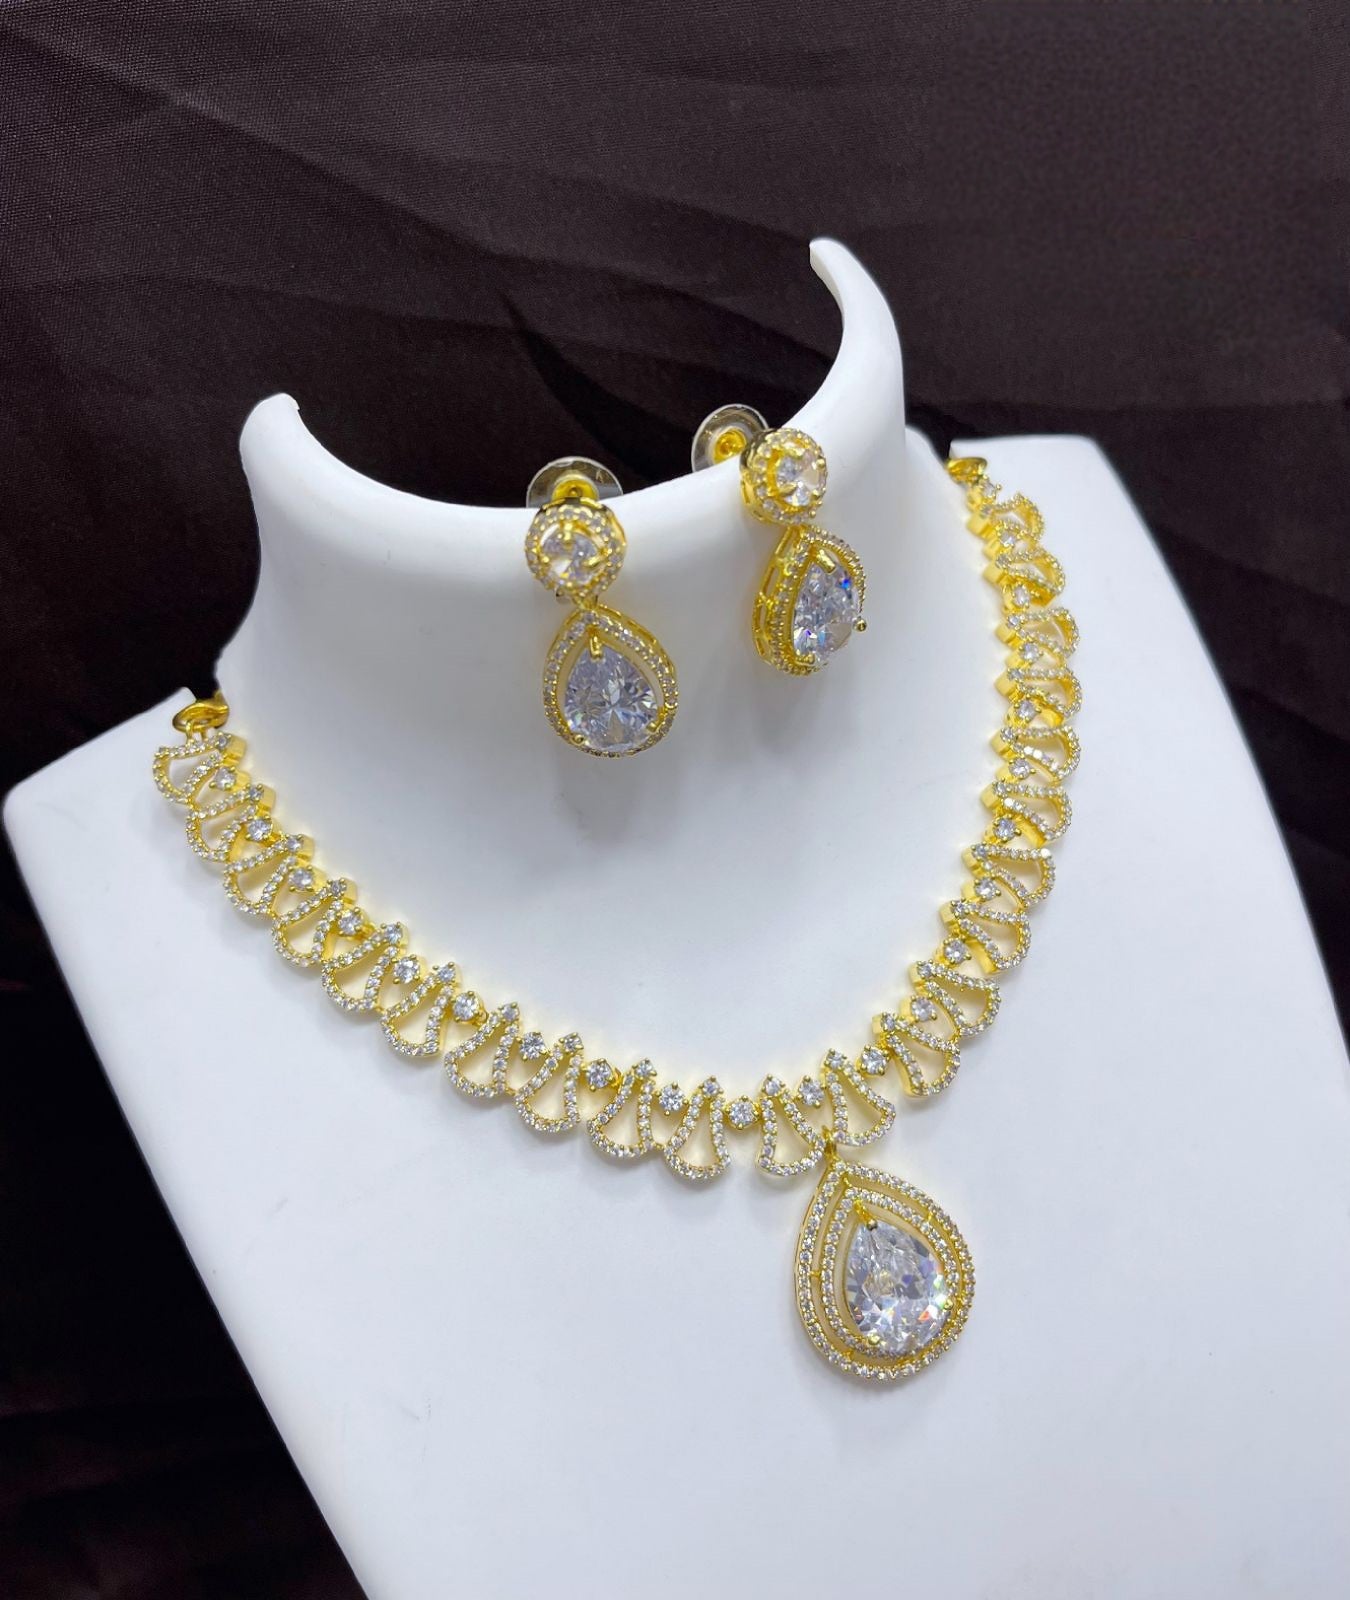 Tending Gold plated American Diamond necklace earring set | Indian Jewelry necklace | Bridal Necklace | bridesmaid gifts | Statement Necklace